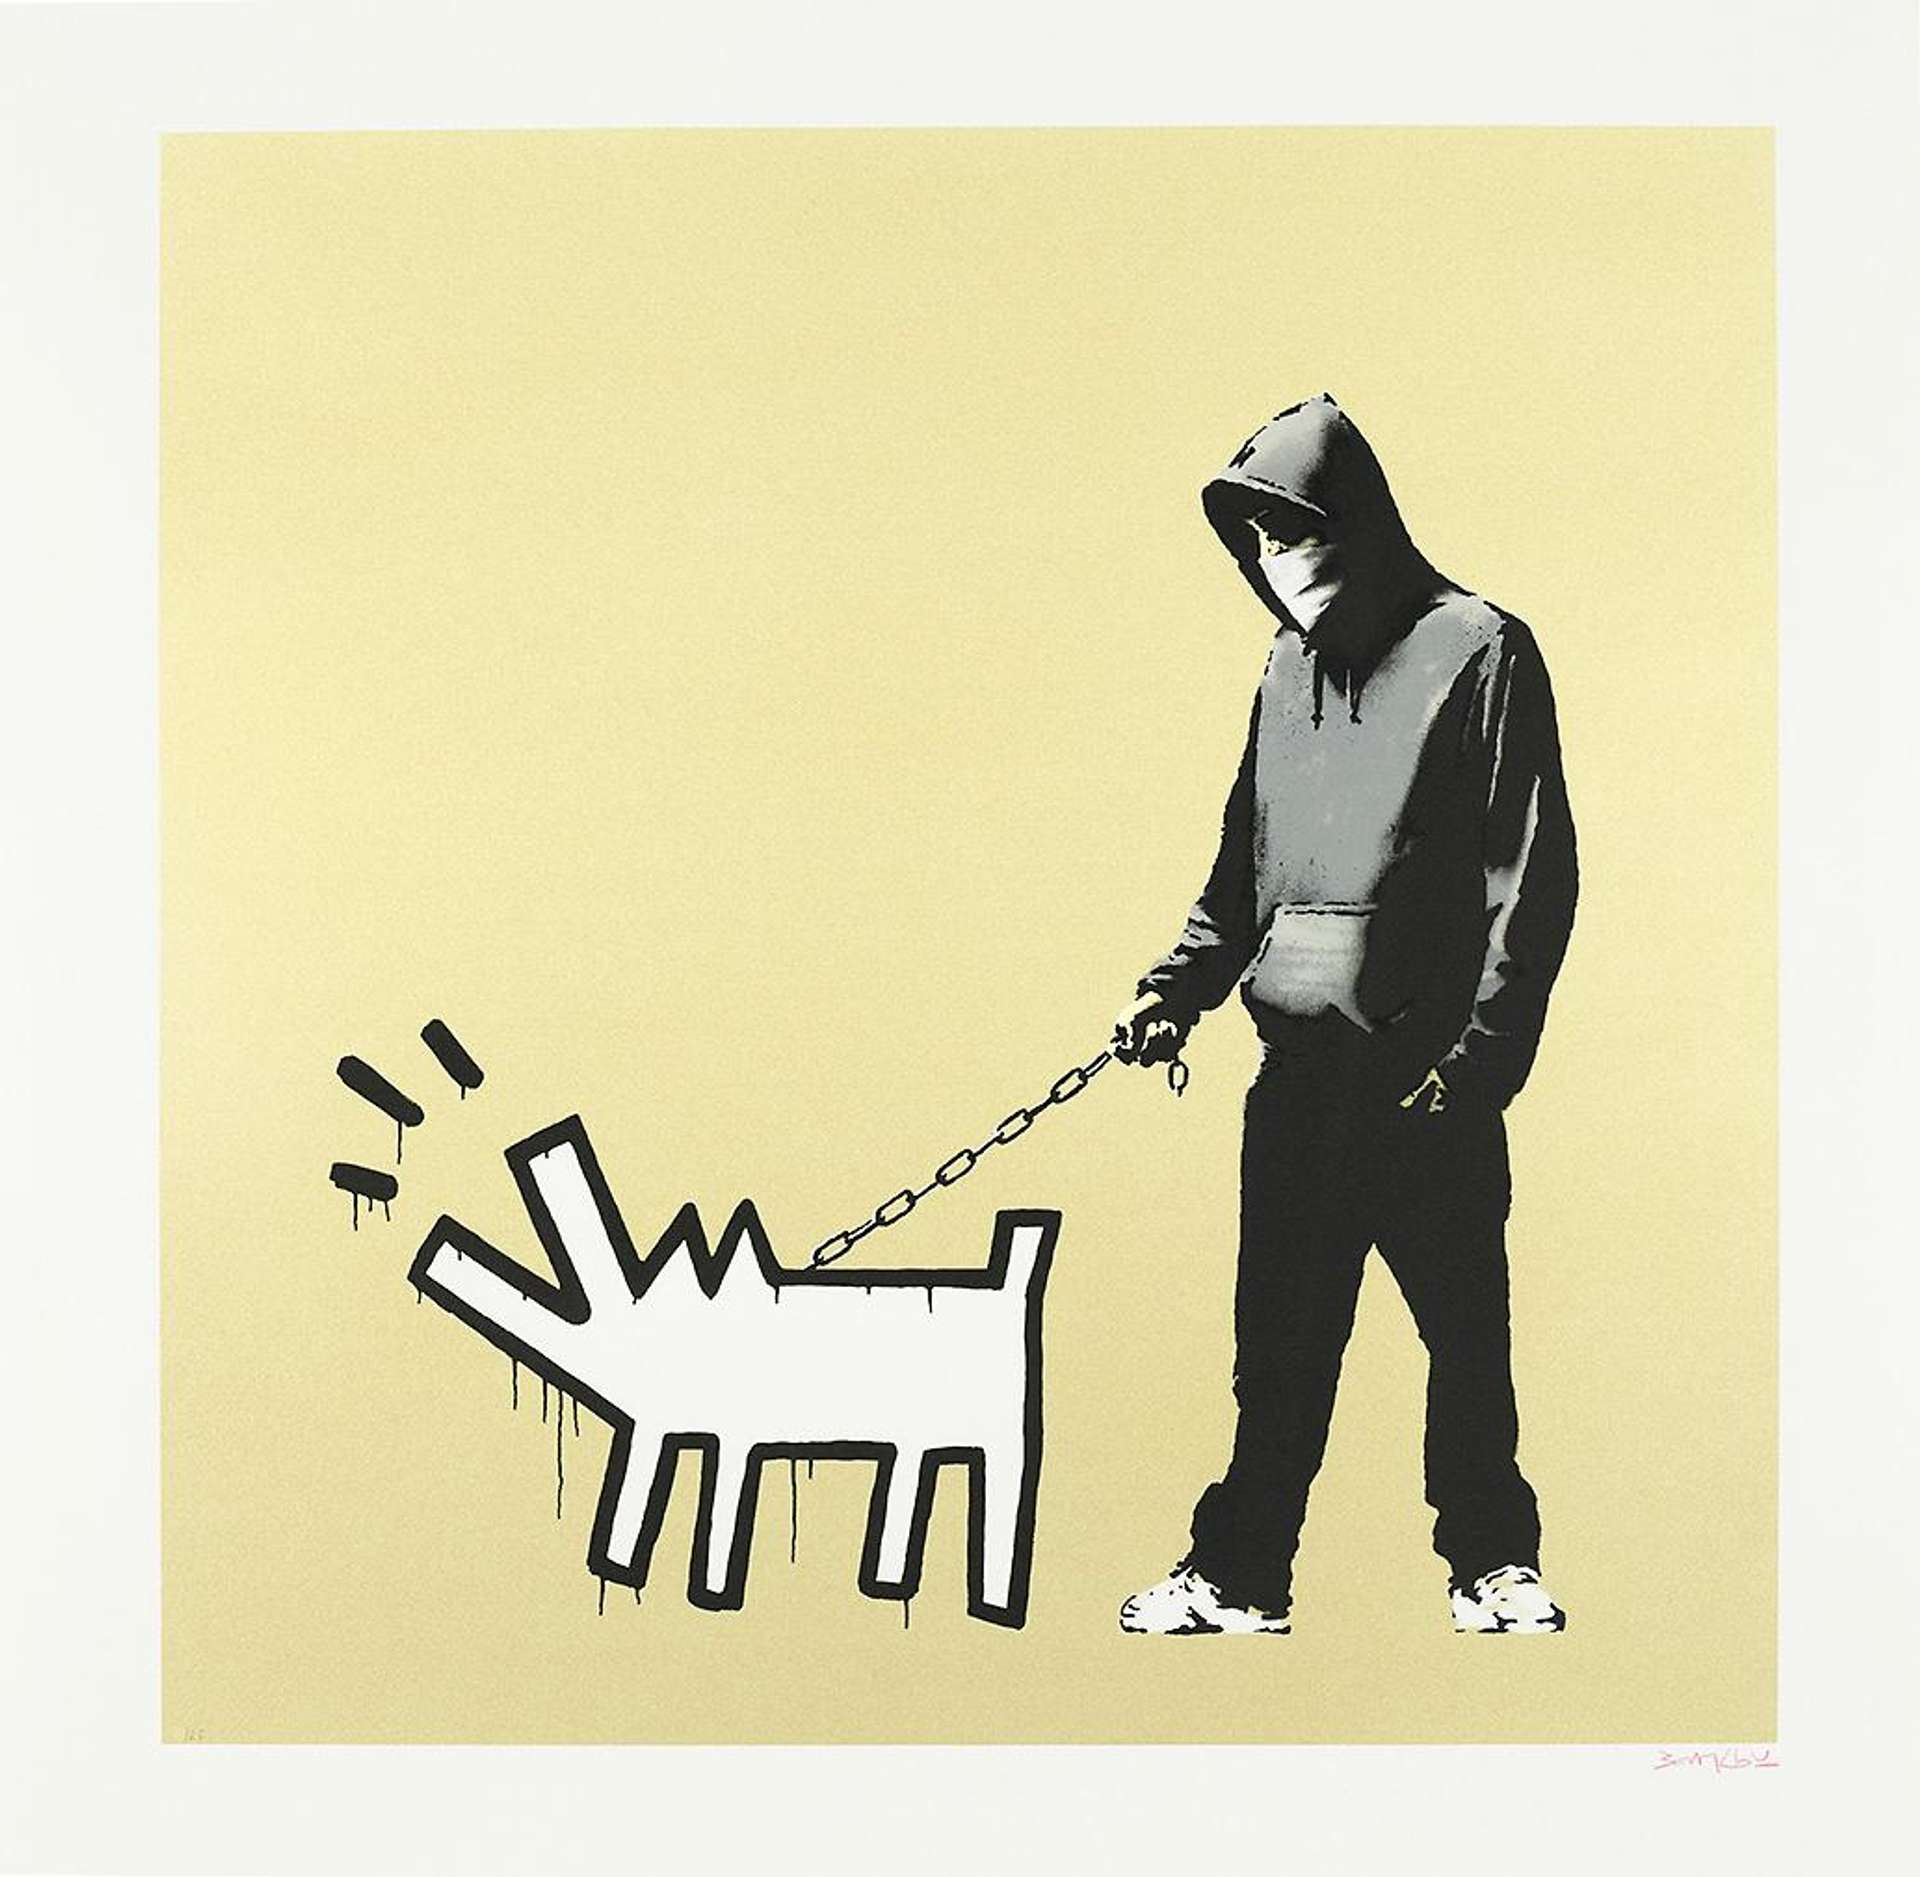 A screenprint by Banksy depicting a hooded figure holding a leash with a Keith Haring-inspired Barking Dog, set against a gold background with a thick white border.